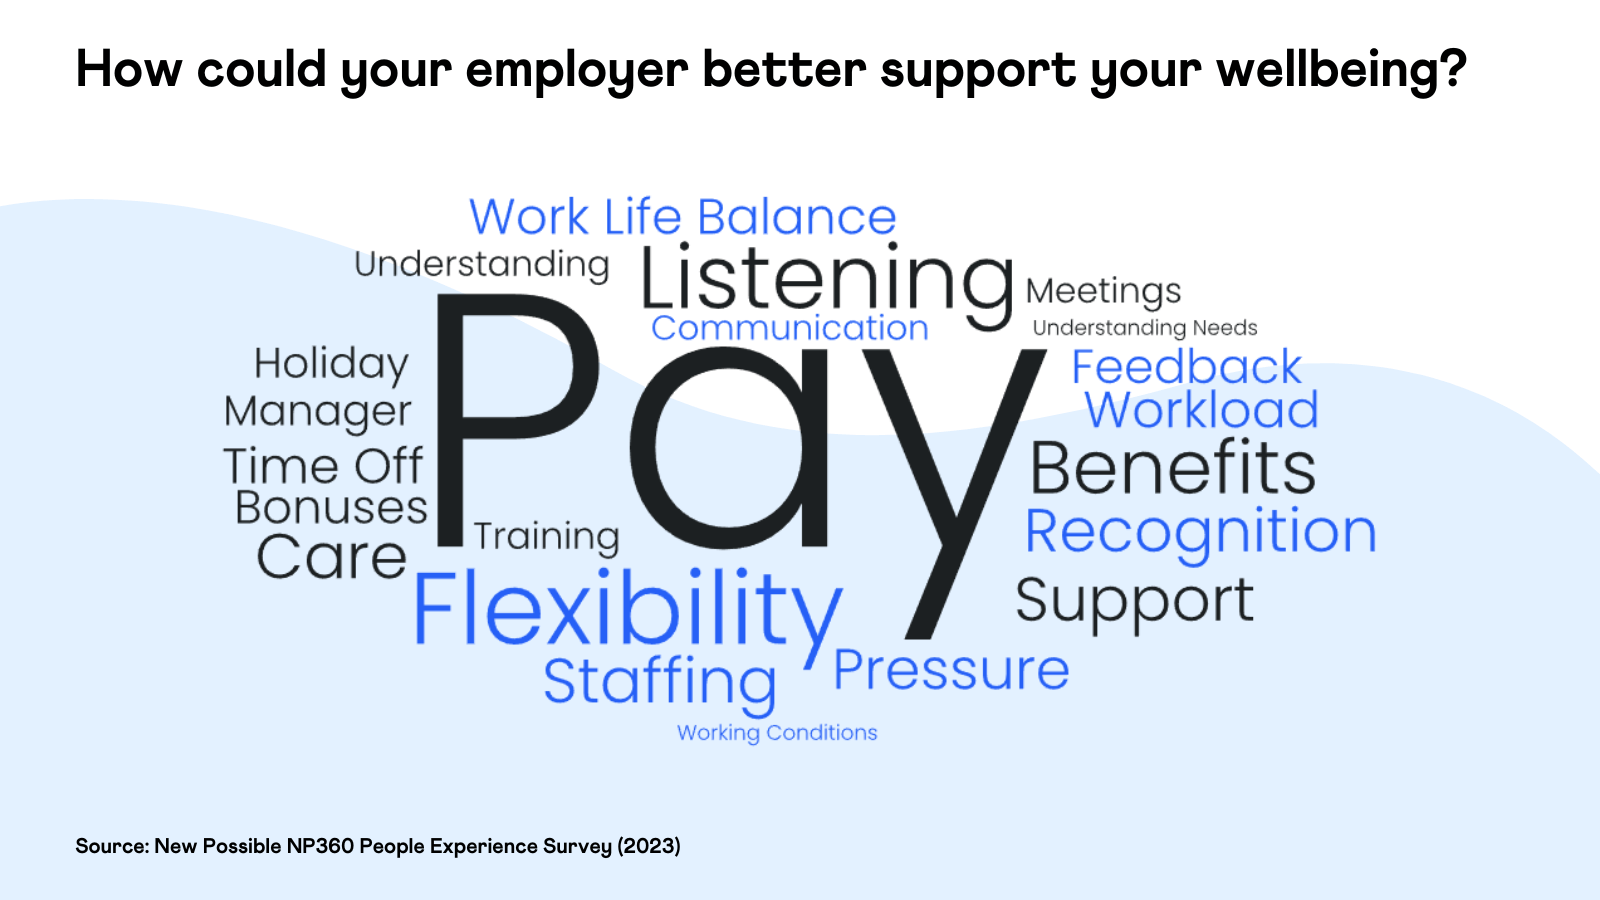 How employees could better support wellbeing - New Possible